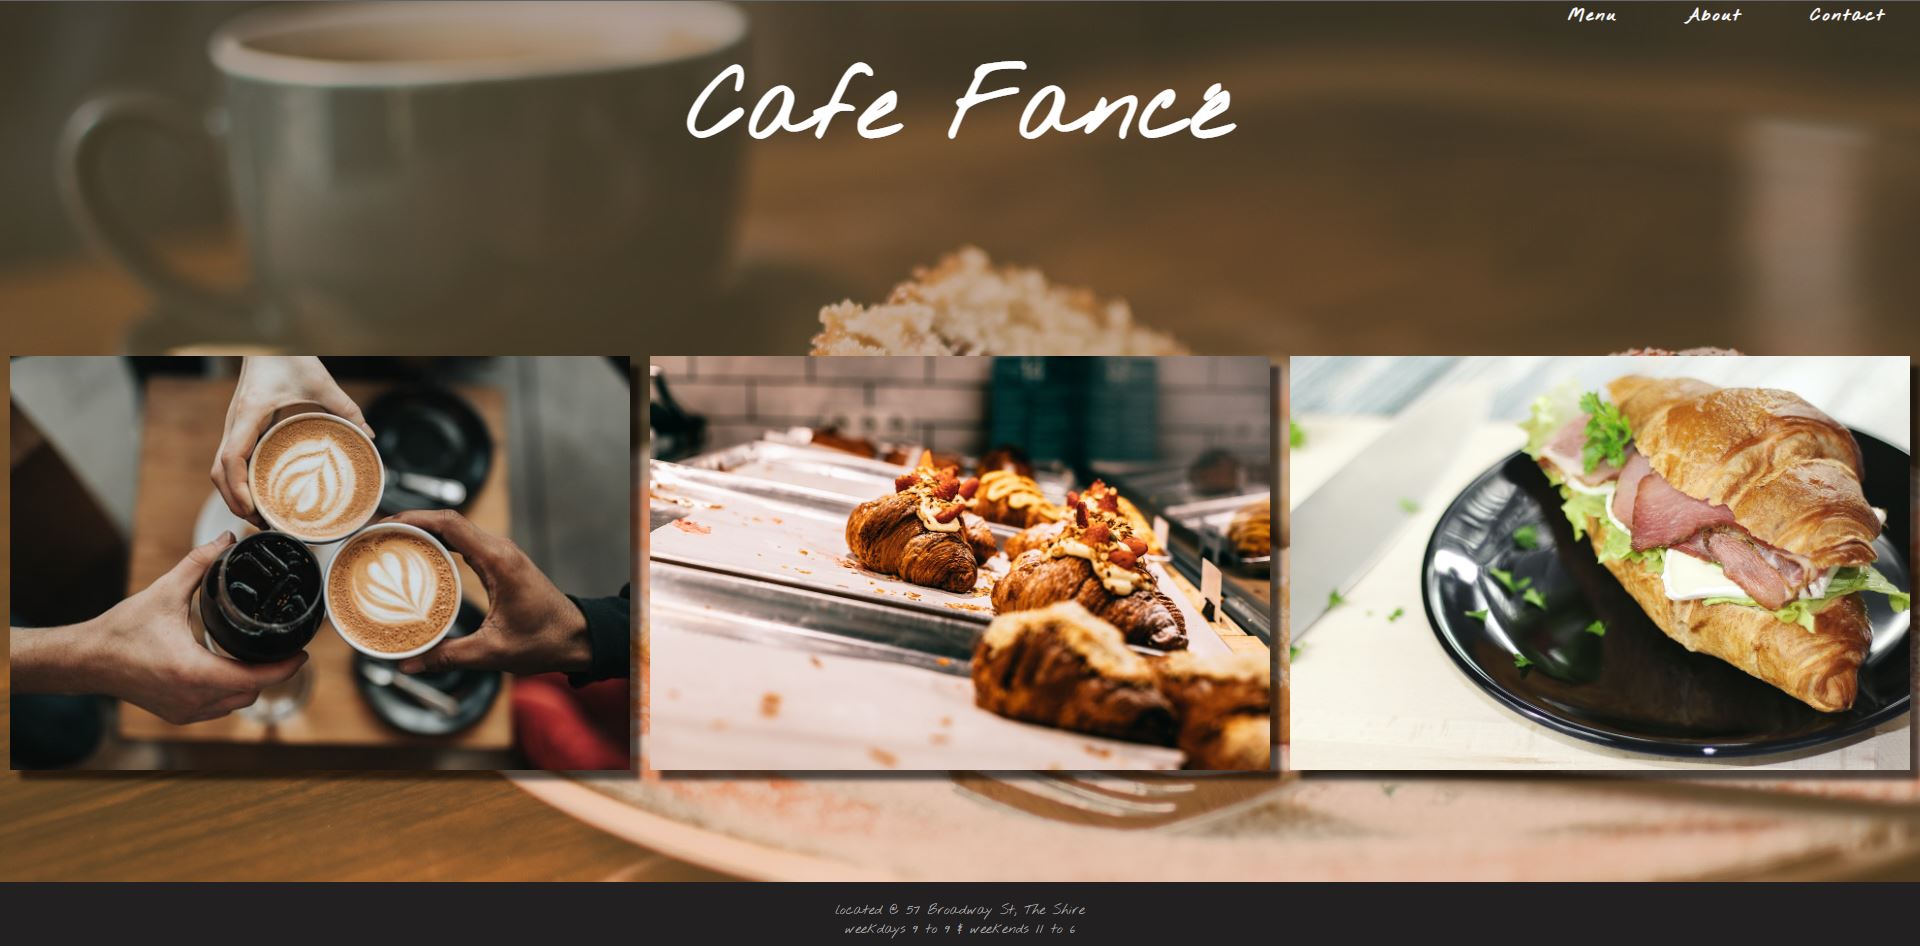 Cafe Fance Home Page